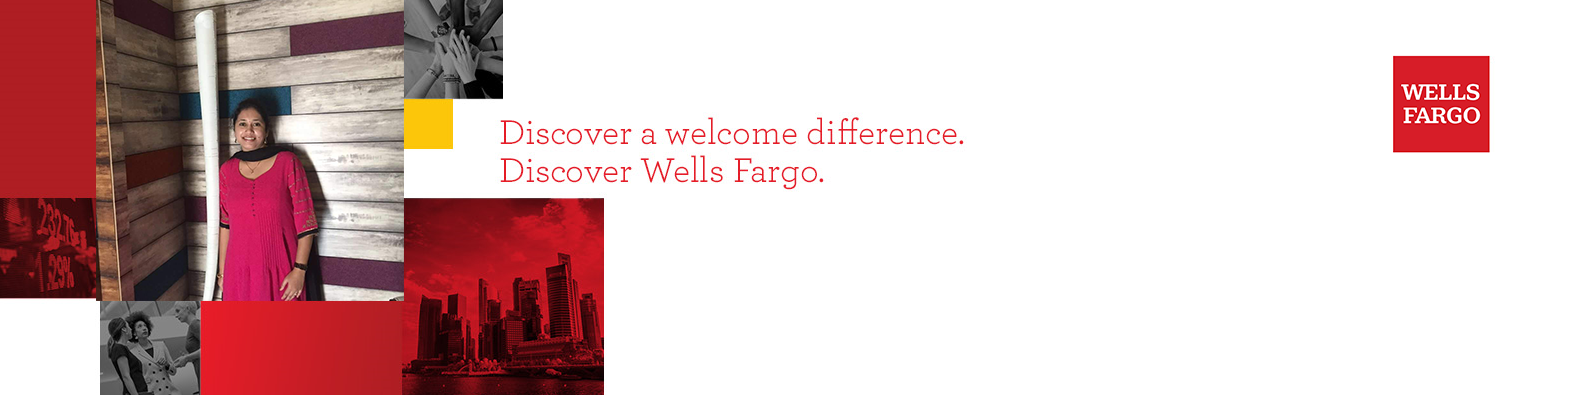 Discover a welcome difference. Discover Wells Fargo.